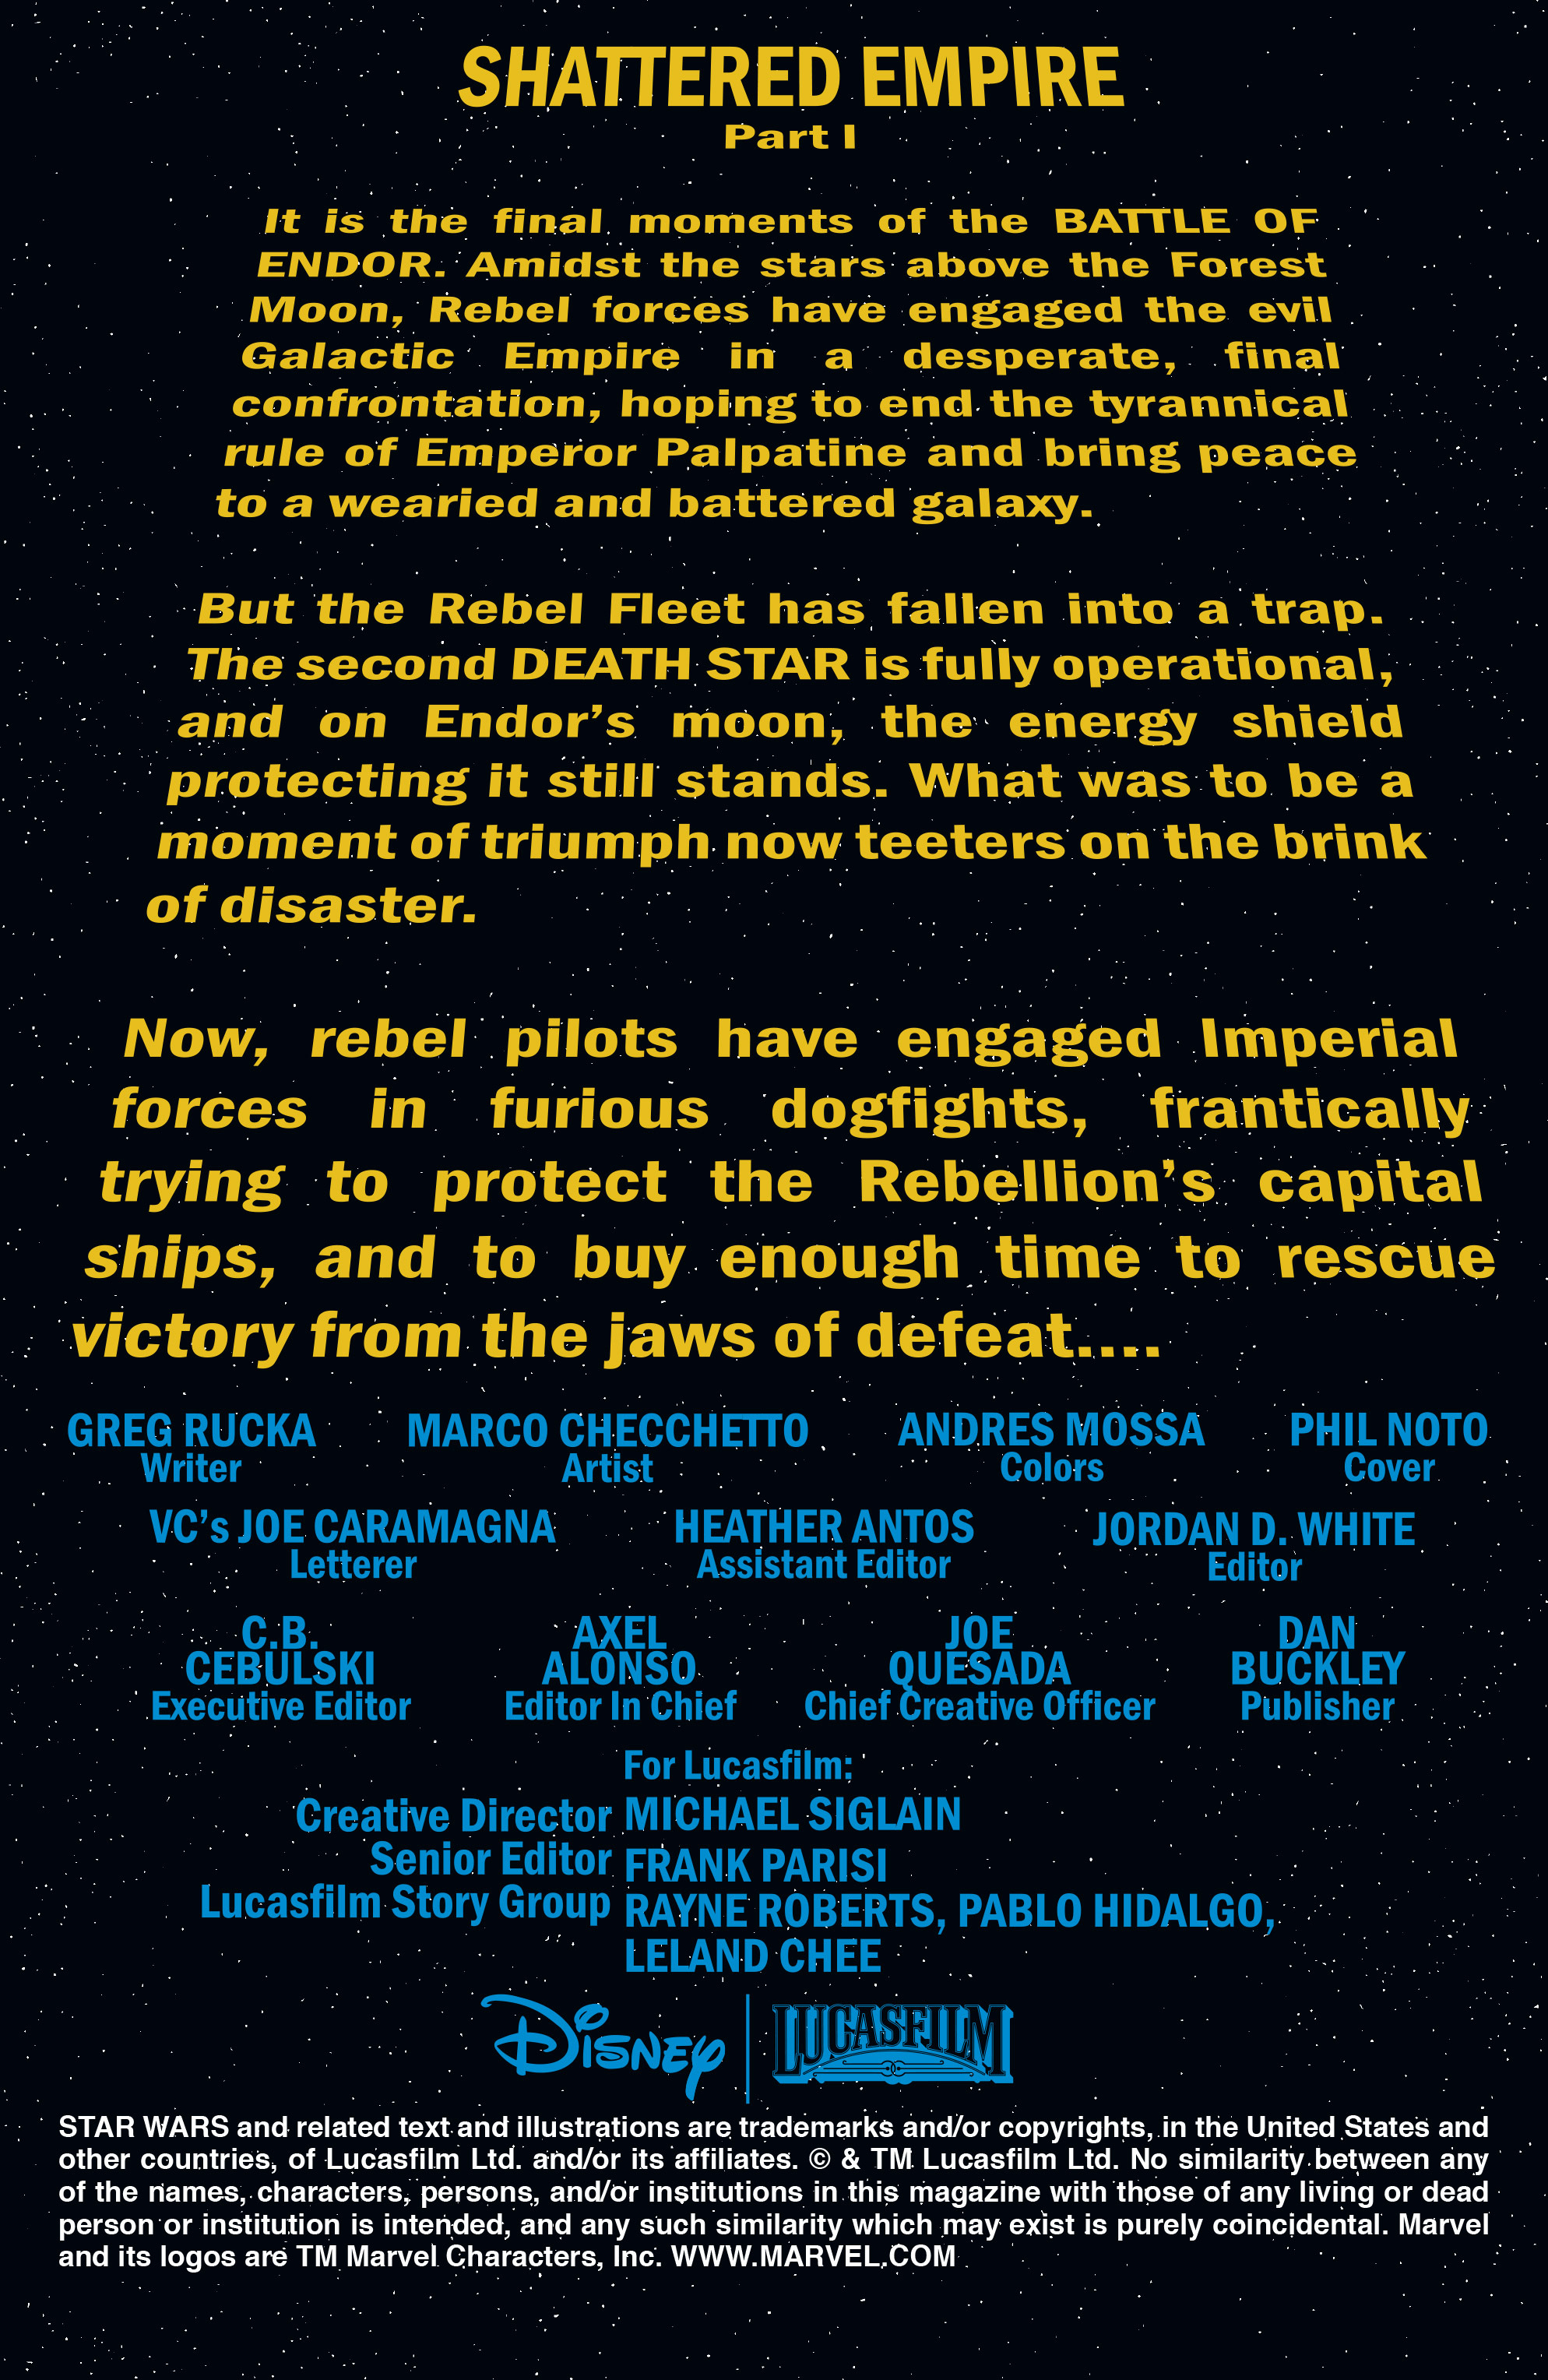 Read online Journey to Star Wars: The Force Awakens - Shattered Empire comic -  Issue #1 - 6